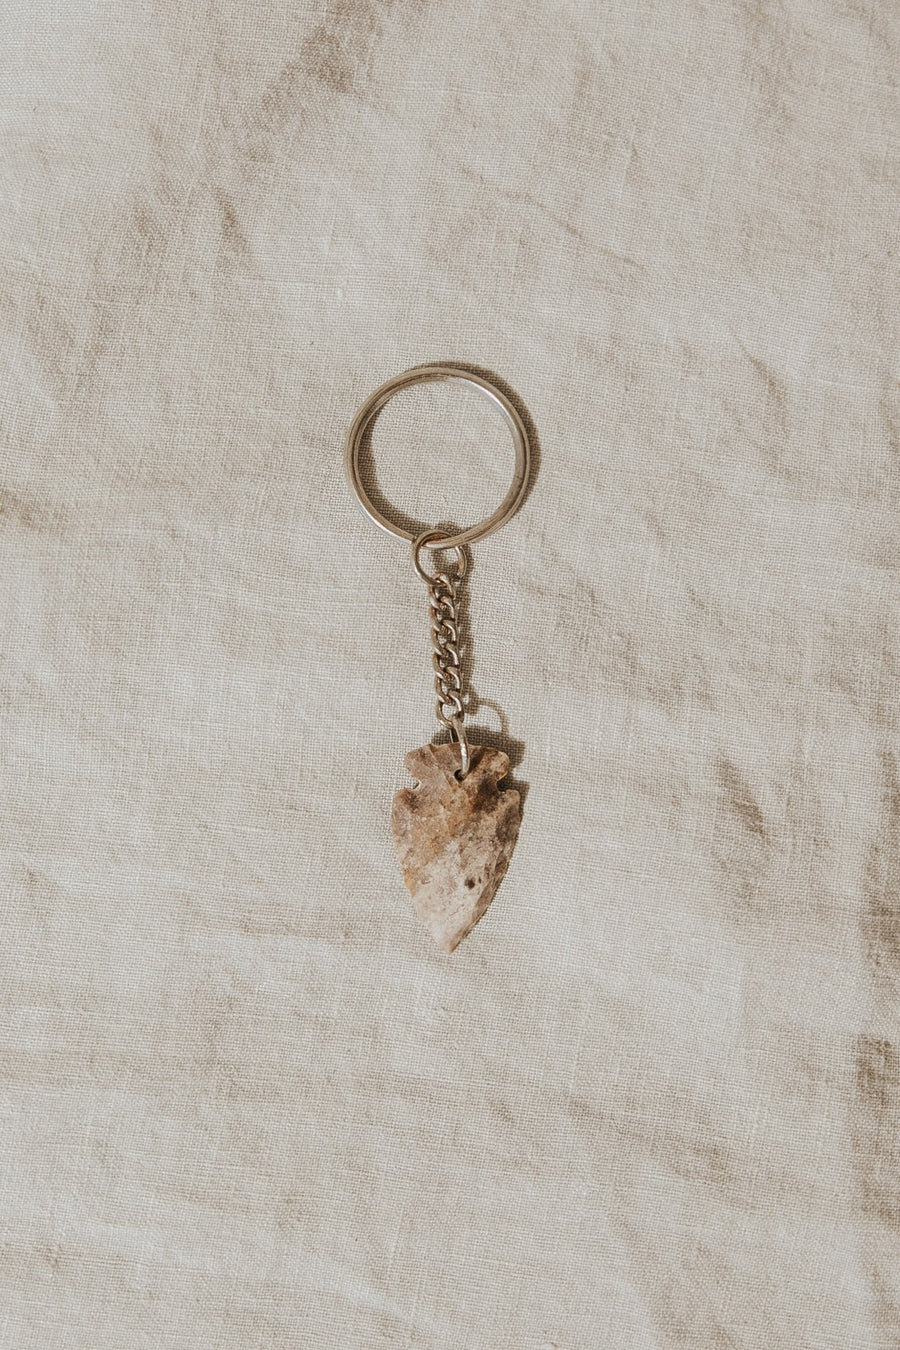 Crystals Objects Crystal Dreams Keychain